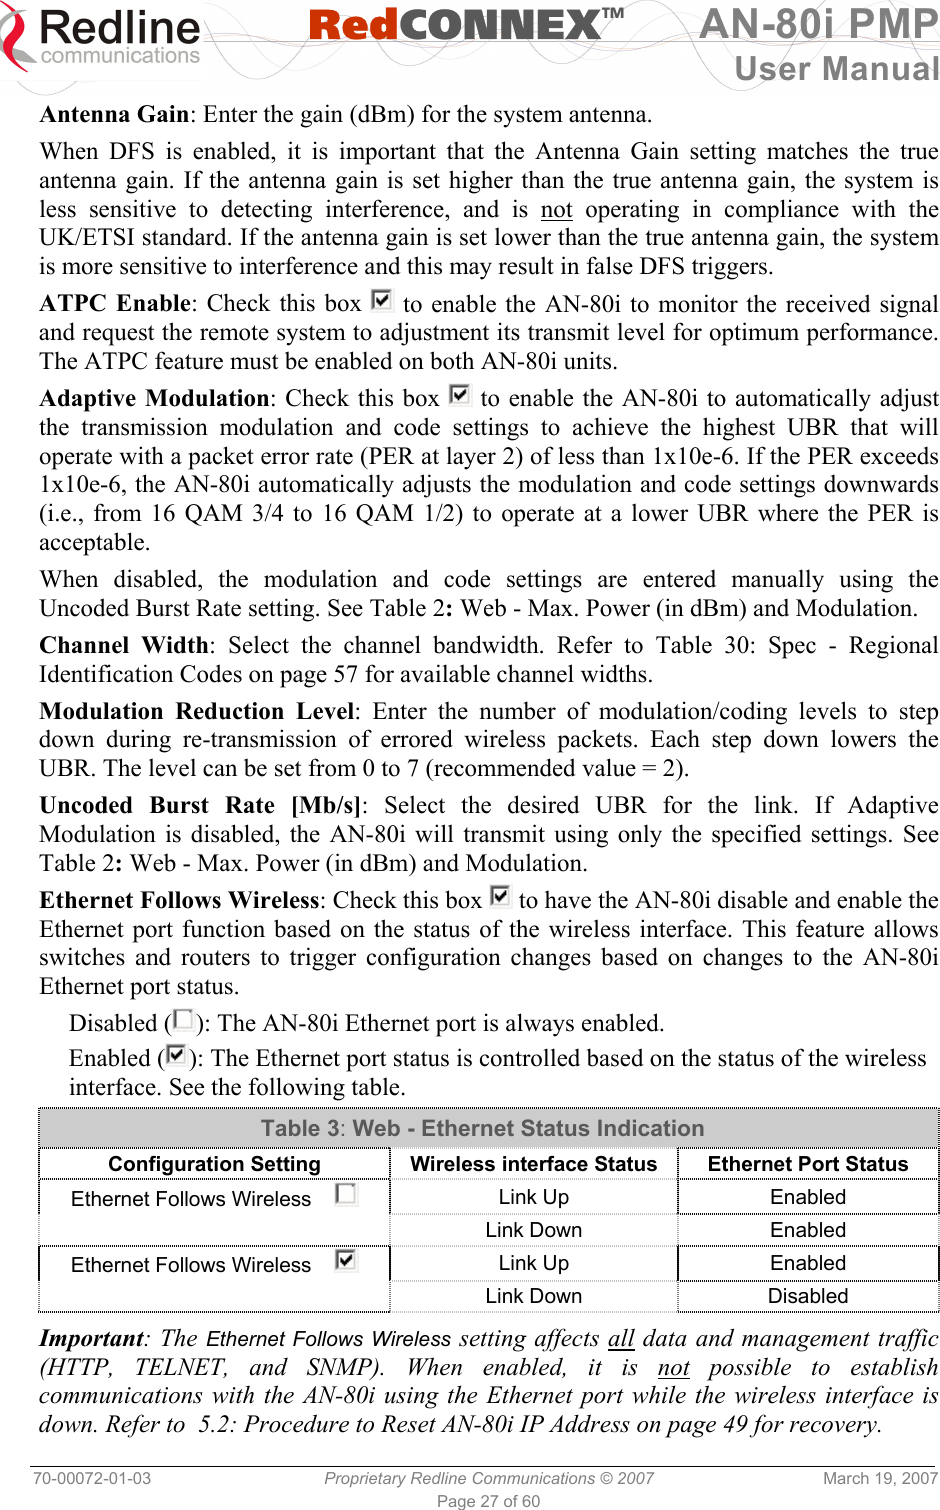   RedCONNEXTM AN-80i PMP User Manual 70-00072-01-03  Proprietary Redline Communications © 2007  March 19, 2007 Page 27 of 60  Antenna Gain: Enter the gain (dBm) for the system antenna. When DFS is enabled, it is important that the Antenna Gain setting matches the true antenna gain. If the antenna gain is set higher than the true antenna gain, the system is less sensitive to detecting interference, and is not operating in compliance with the UK/ETSI standard. If the antenna gain is set lower than the true antenna gain, the system is more sensitive to interference and this may result in false DFS triggers. ATPC Enable: Check this box   to enable the AN-80i to monitor the received signal and request the remote system to adjustment its transmit level for optimum performance. The ATPC feature must be enabled on both AN-80i units. Adaptive Modulation: Check this box   to enable the AN-80i to automatically adjust the transmission modulation and code settings to achieve the highest UBR that will operate with a packet error rate (PER at layer 2) of less than 1x10e-6. If the PER exceeds 1x10e-6, the AN-80i automatically adjusts the modulation and code settings downwards (i.e., from 16 QAM 3/4 to 16 QAM 1/2) to operate at a lower UBR where the PER is acceptable. When disabled, the modulation and code settings are entered manually using the Uncoded Burst Rate setting. See Table 2: Web - Max. Power (in dBm) and Modulation. Channel Width: Select the channel bandwidth. Refer to Table 30: Spec - Regional Identification Codes on page 57 for available channel widths. Modulation Reduction Level: Enter the number of modulation/coding levels to step down during re-transmission of errored wireless packets. Each step down lowers the UBR. The level can be set from 0 to 7 (recommended value = 2). Uncoded Burst Rate [Mb/s]: Select the desired UBR for the link. If Adaptive Modulation is disabled, the AN-80i will transmit using only the specified settings. See Table 2: Web - Max. Power (in dBm) and Modulation.  Ethernet Follows Wireless: Check this box   to have the AN-80i disable and enable the Ethernet port function based on the status of the wireless interface. This feature allows switches and routers to trigger configuration changes based on changes to the AN-80i Ethernet port status. Disabled ( ): The AN-80i Ethernet port is always enabled. Enabled ( ): The Ethernet port status is controlled based on the status of the wireless interface. See the following table. Table 3: Web - Ethernet Status Indication Configuration Setting  Wireless interface Status  Ethernet Port Status Ethernet Follows Wireless      Link Up  Enabled  Link Down Enabled Ethernet Follows Wireless      Link Up  Enabled  Link Down Disabled  Important: The Ethernet Follows Wireless setting affects all data and management traffic (HTTP, TELNET, and SNMP). When enabled, it is not possible to establish communications with the AN-80i using the Ethernet port while the wireless interface is down. Refer to  5.2: Procedure to Reset AN-80i IP Address on page 49 for recovery. 